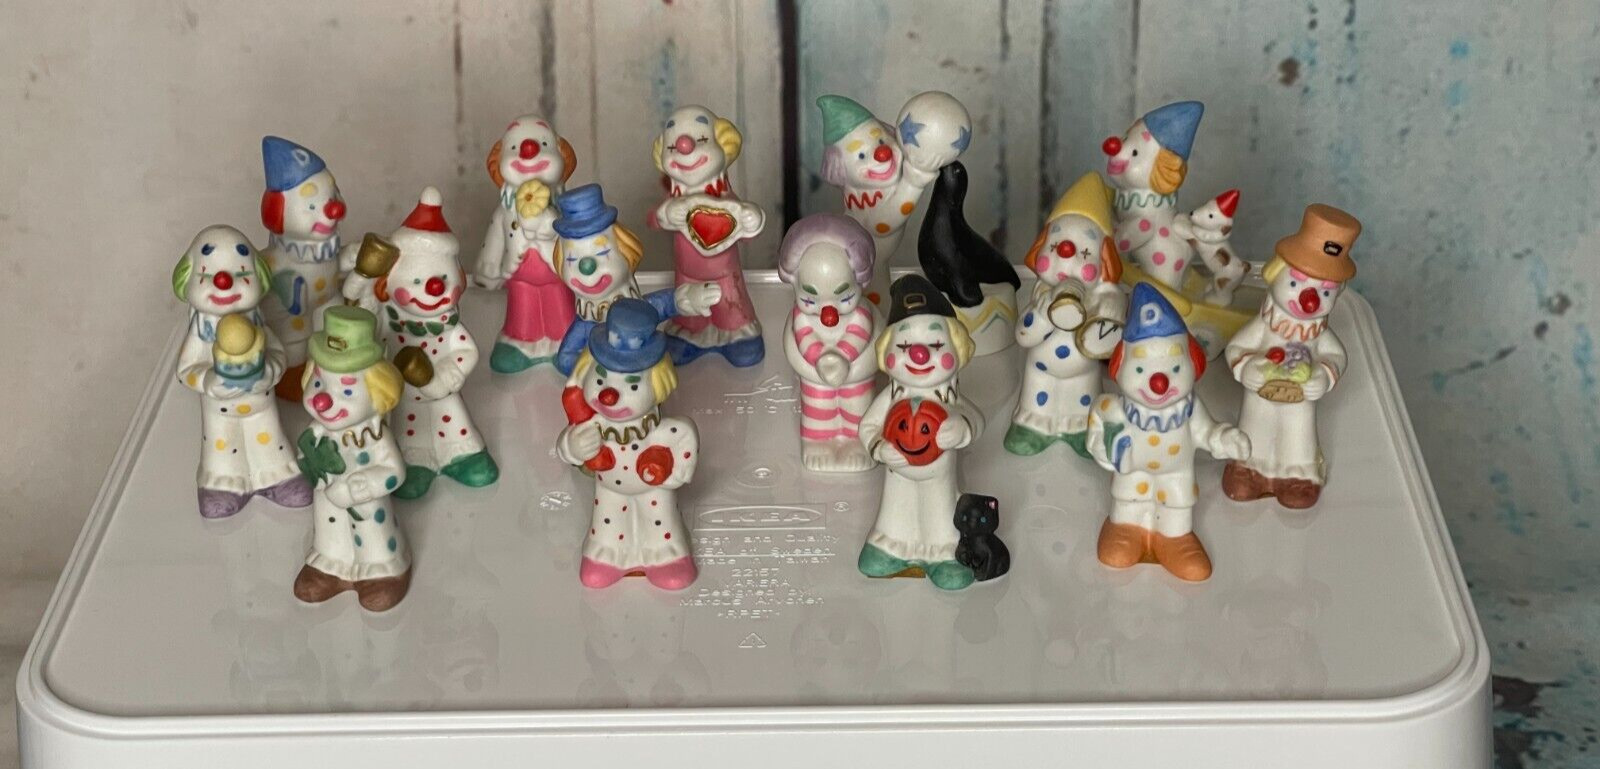 Lot of (15) Vintage Napco Porcelain Collectible Circus Clown Figurines 1980's